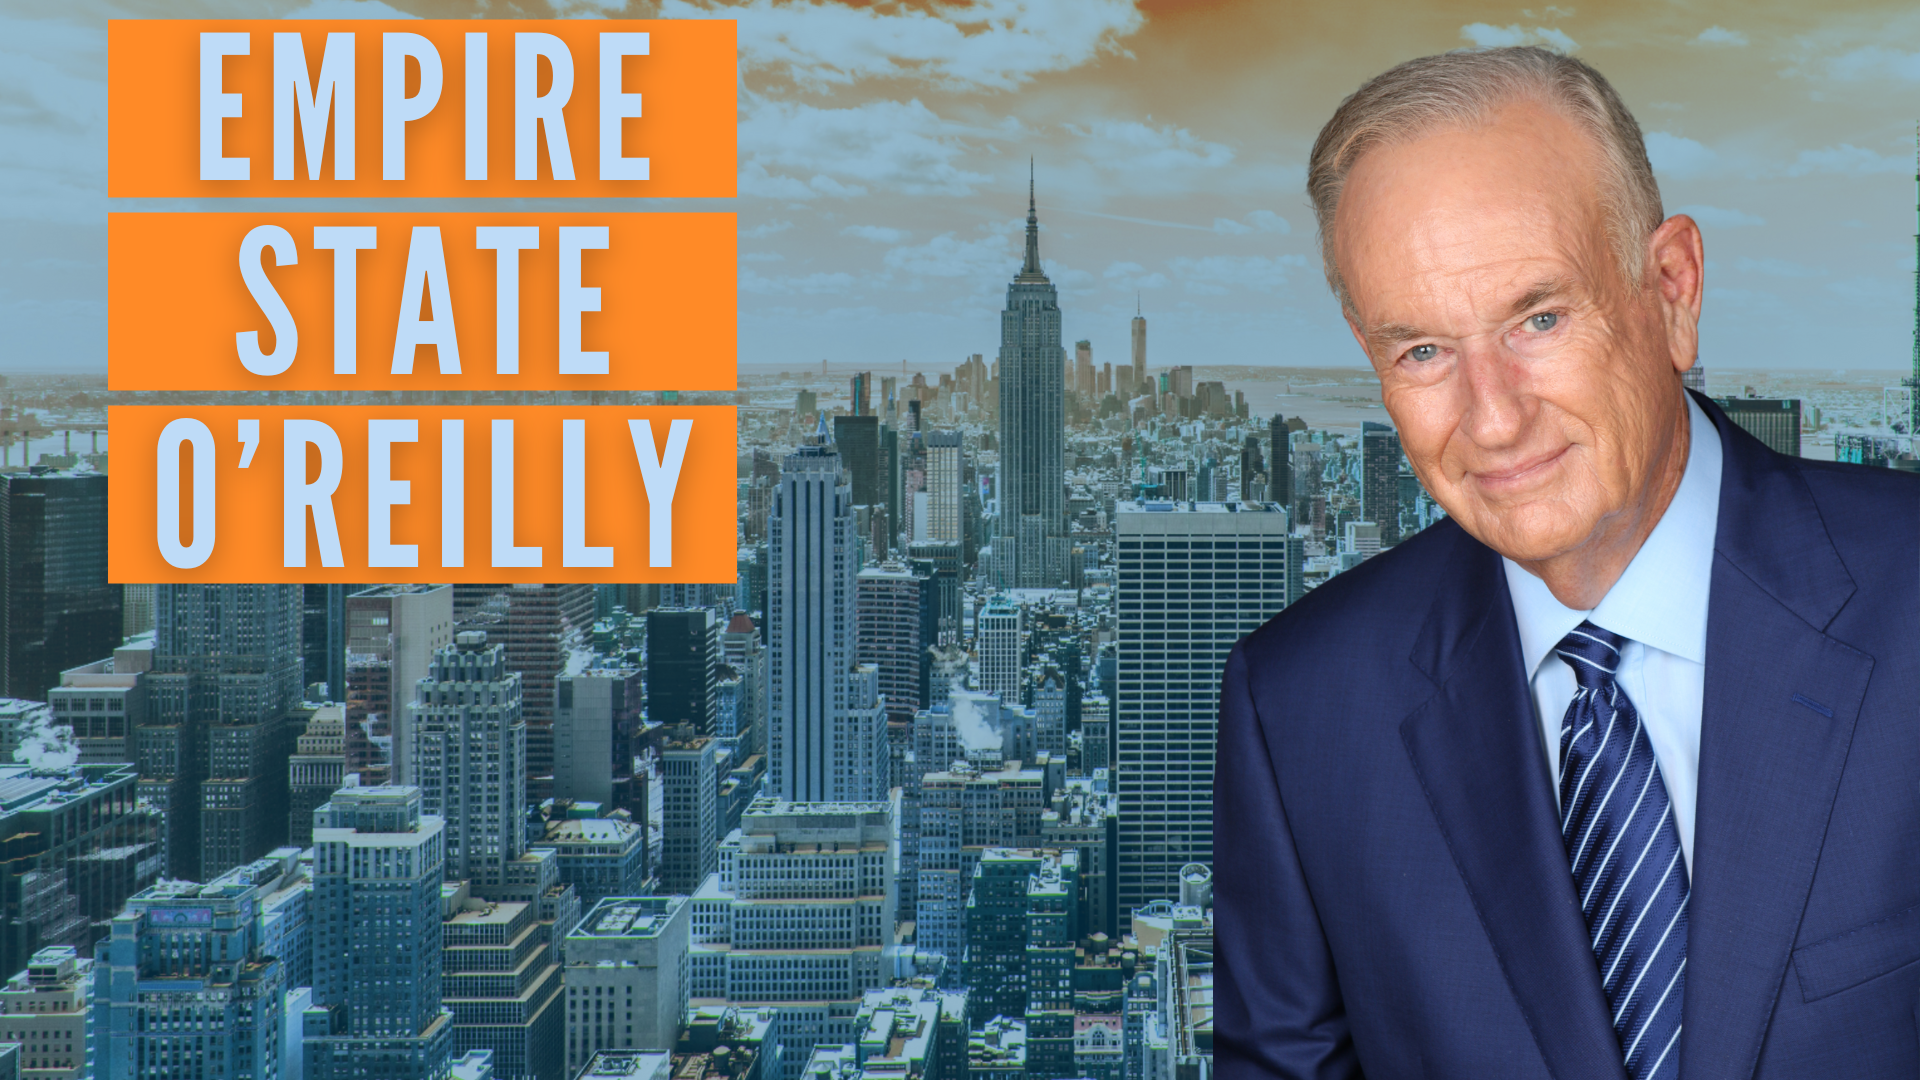 Empire State O'Reilly: Time Square Attackers